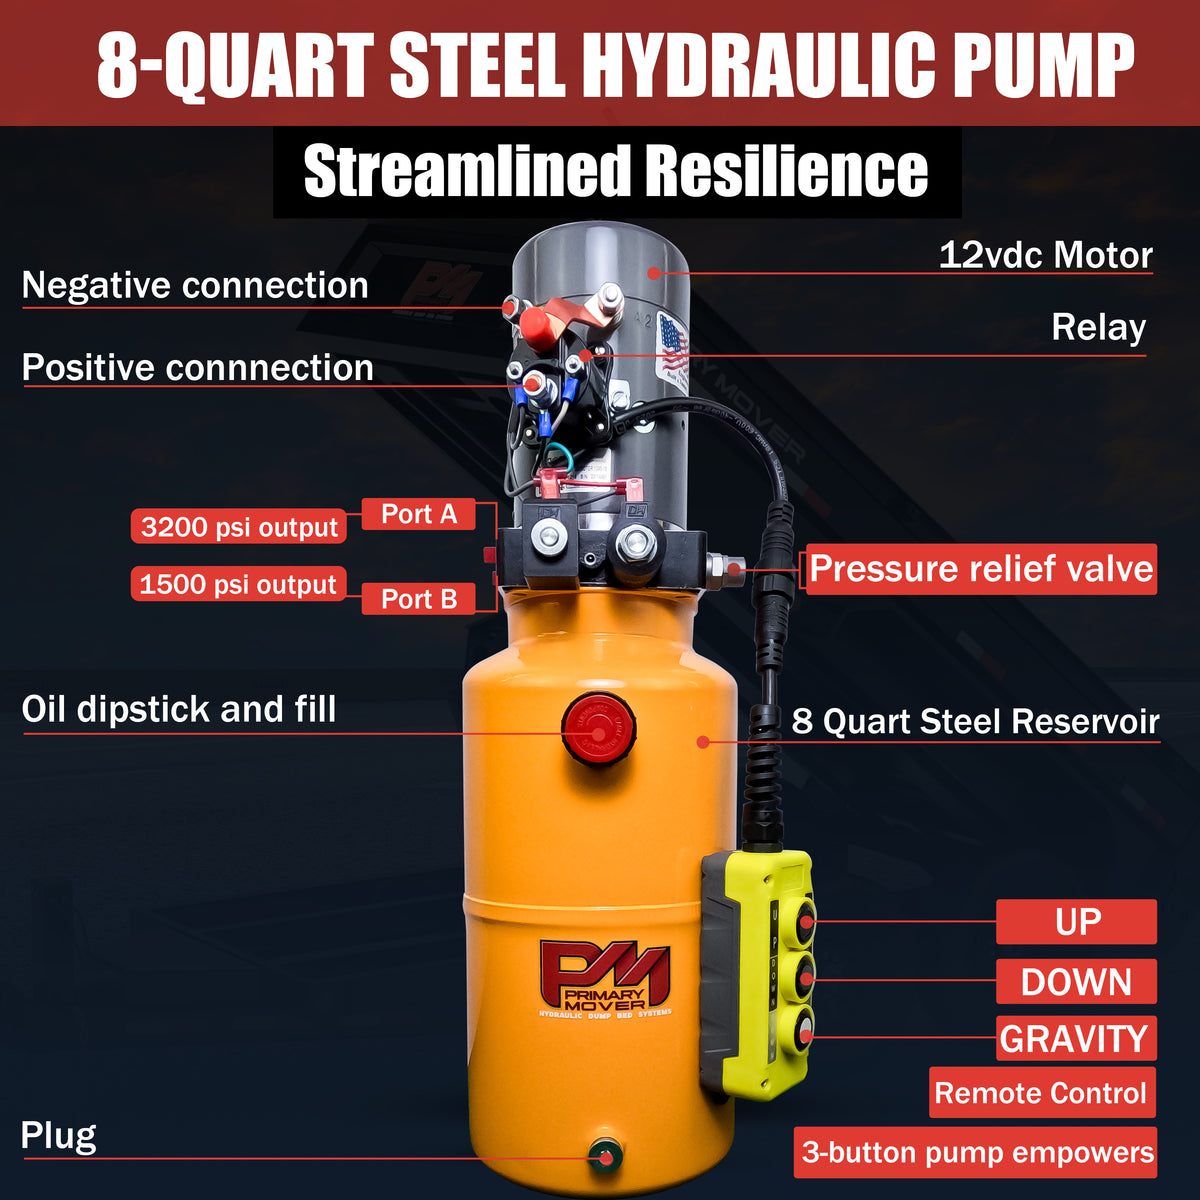 KTI 12V Double-Acting Hydraulic Pump - Steel Reservoir, featuring a yellow and silver cylinder with a red button, compact design for efficient hydraulic systems.